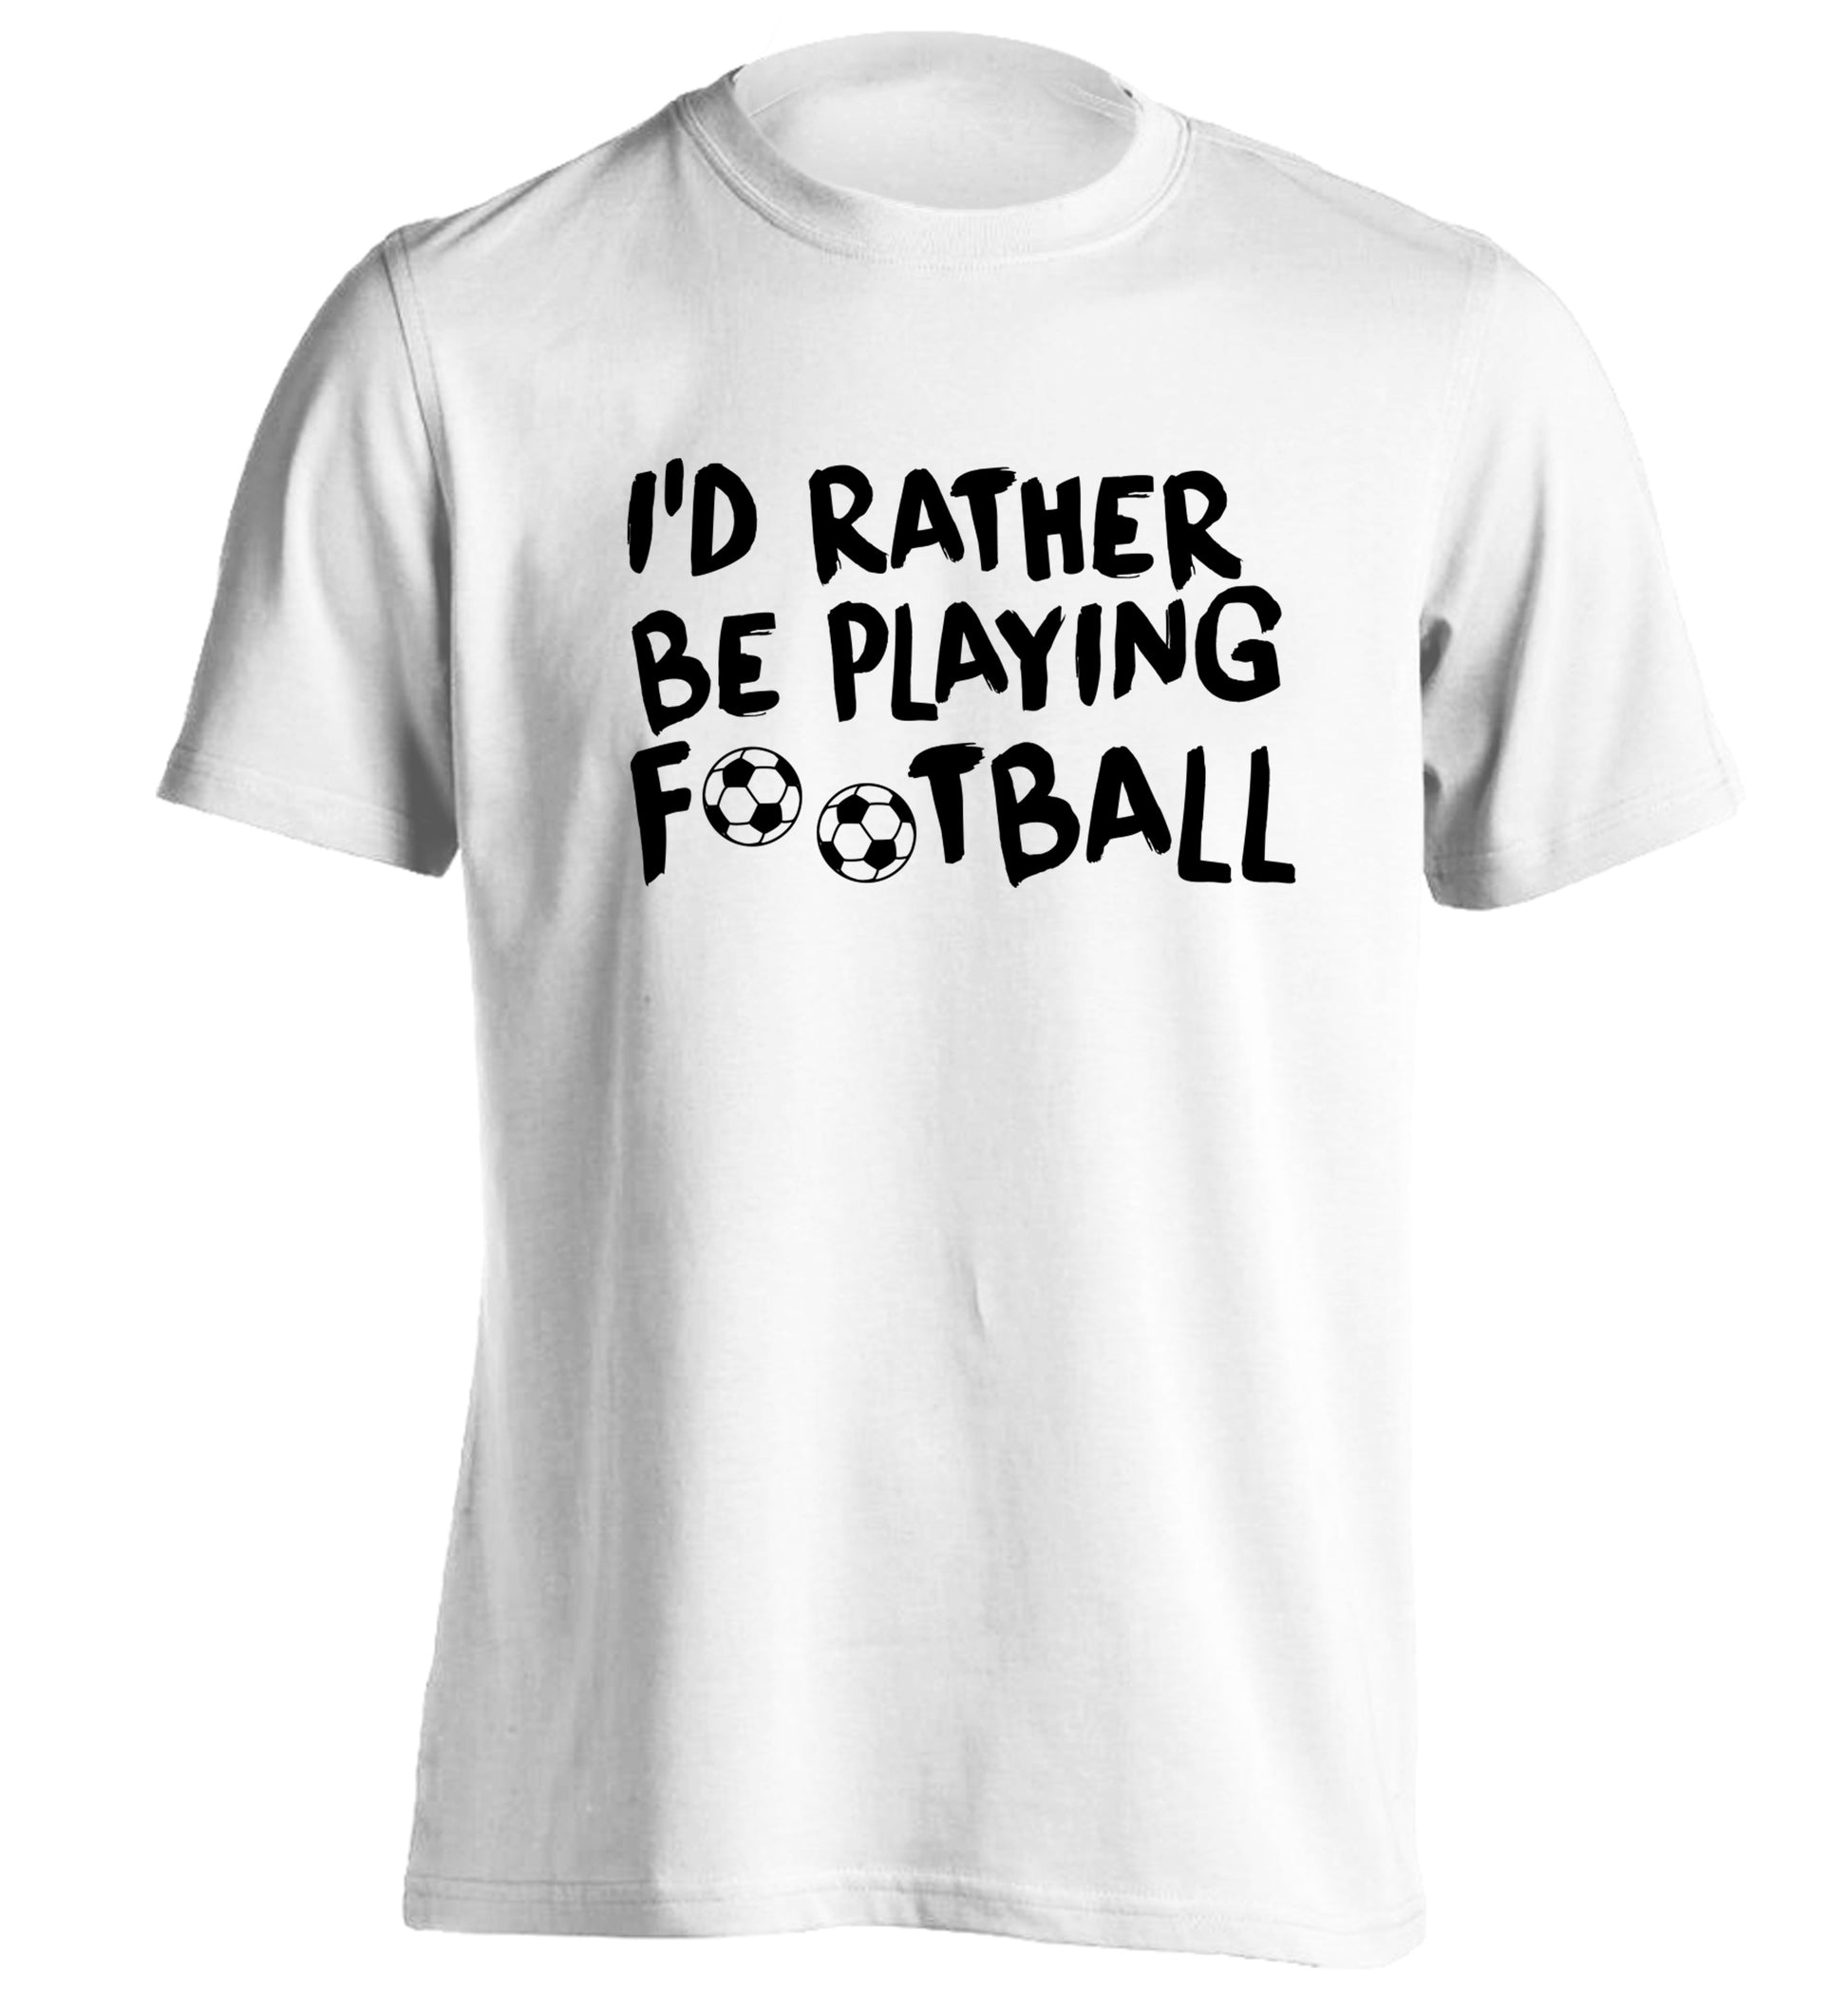 I'd rather be playing football adults unisexwhite Tshirt 2XL